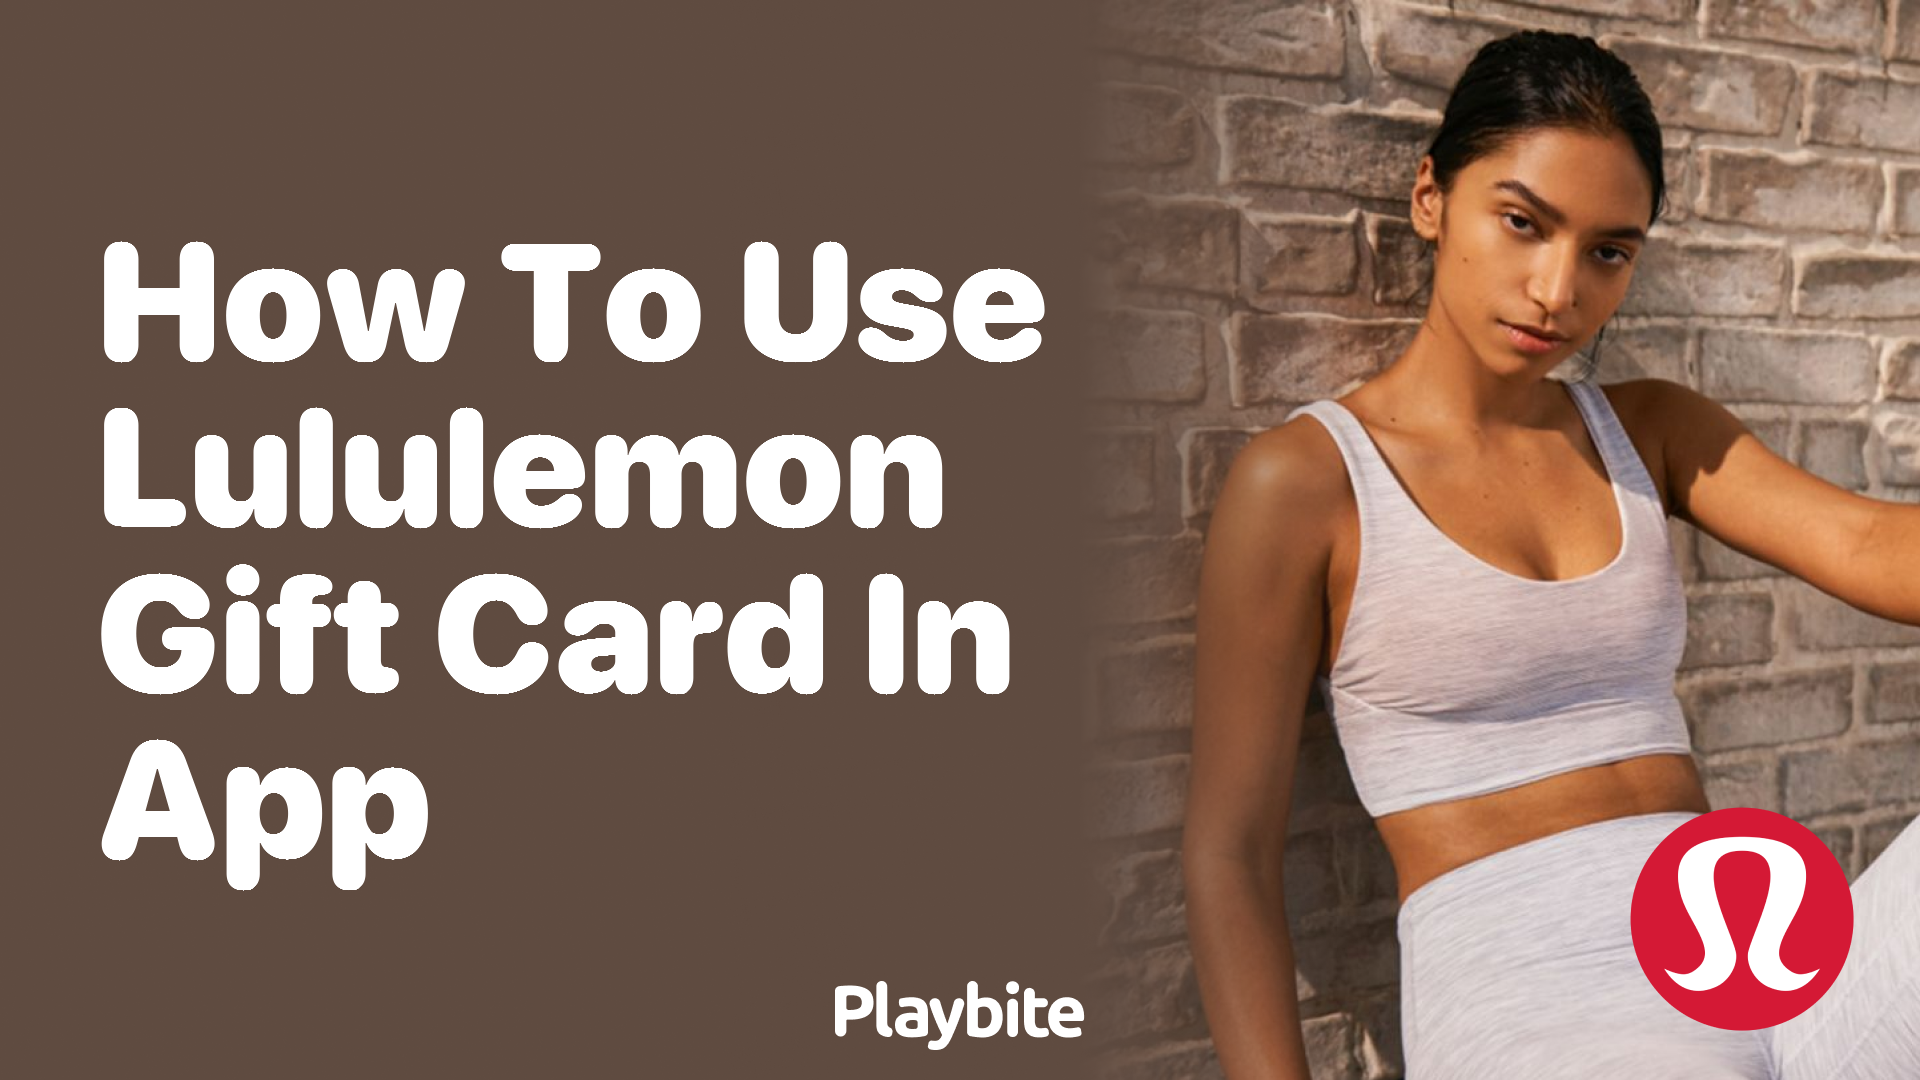 Can't Use Lululemon Discount With Gift Card? Here's What You Need to Know -  Playbite